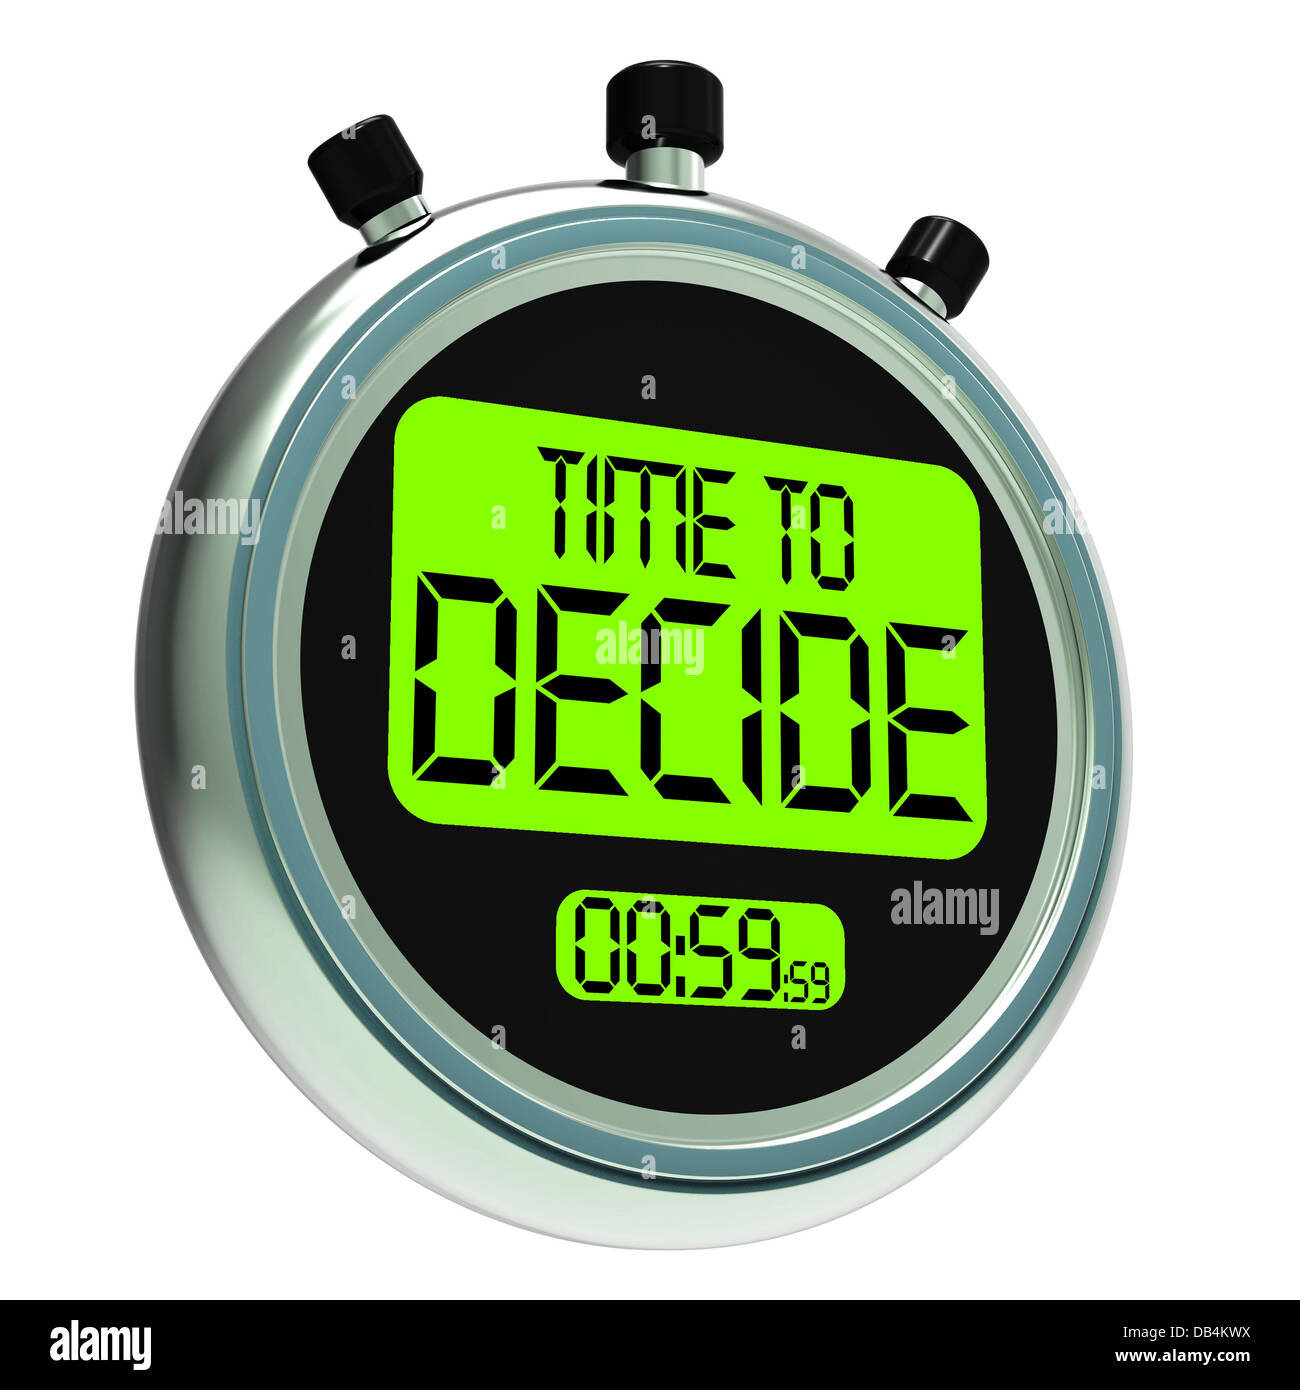 Time To Decide Message Meaning Decision And Choice Stock Photo